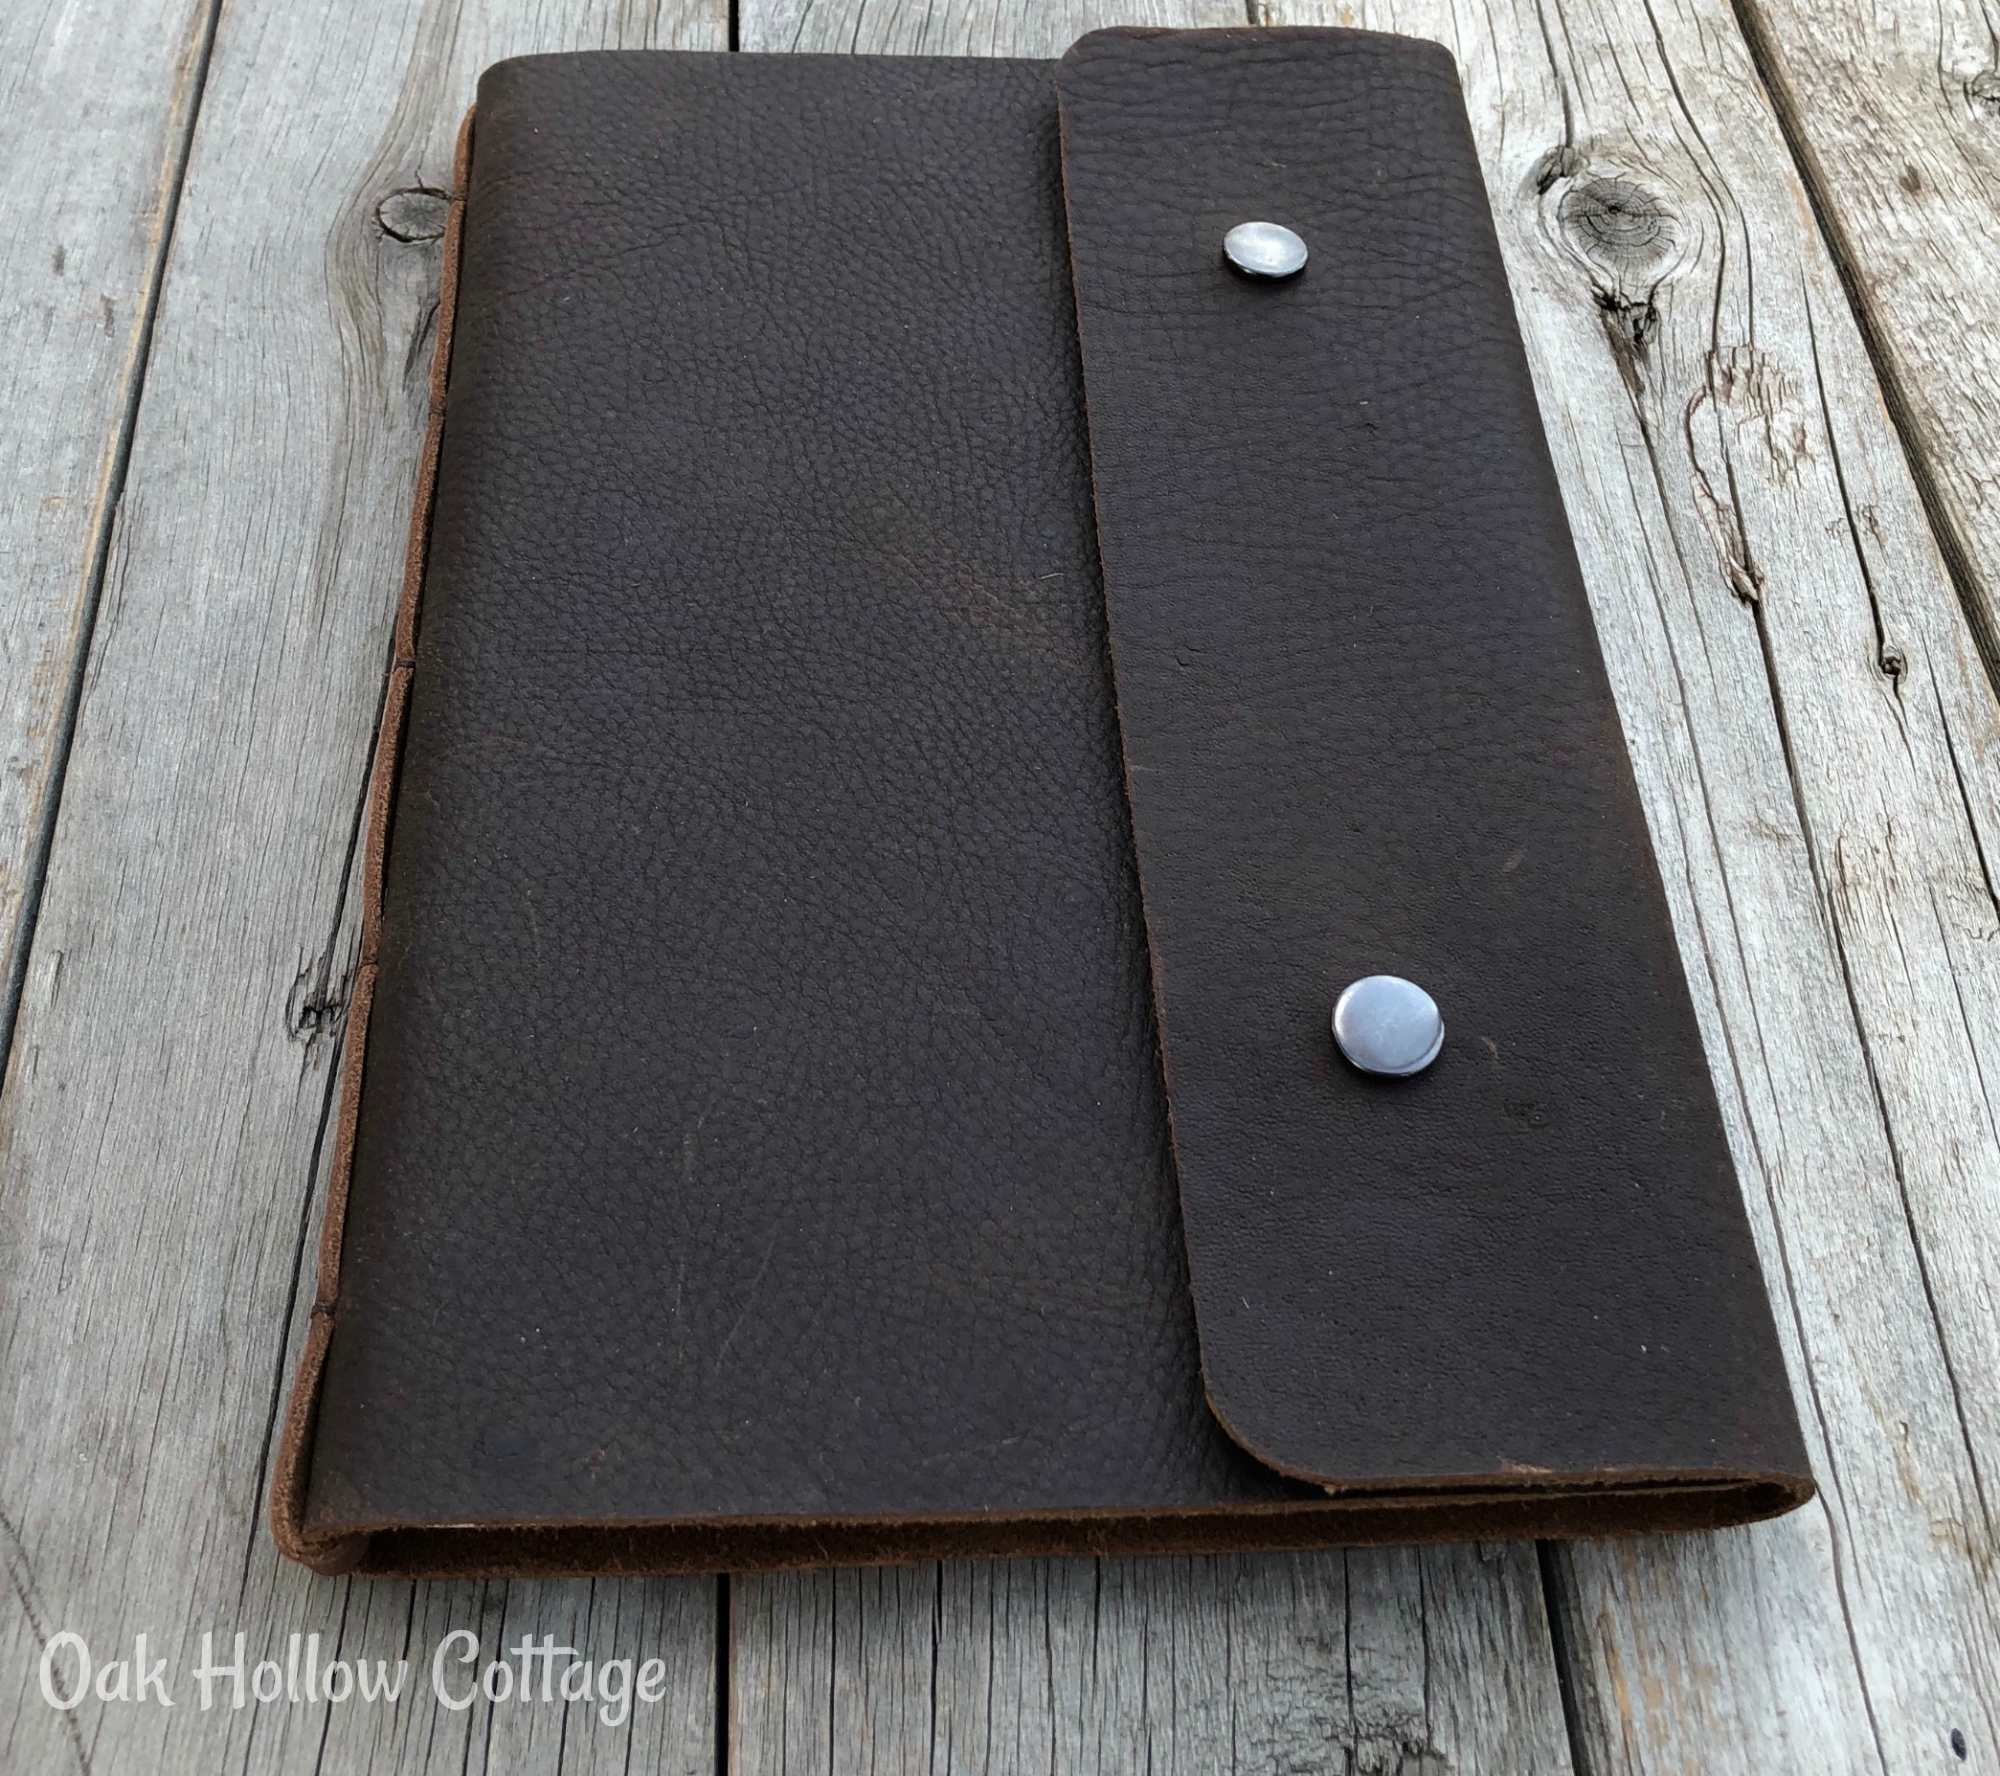 Need a unique gift for a traveler in your life? Looking for a sturdy travel journal for yourself? Our handmade leather travel journals make great gifts for yourself or others. Order them at etsy.com/shop/OakHollowCottage.